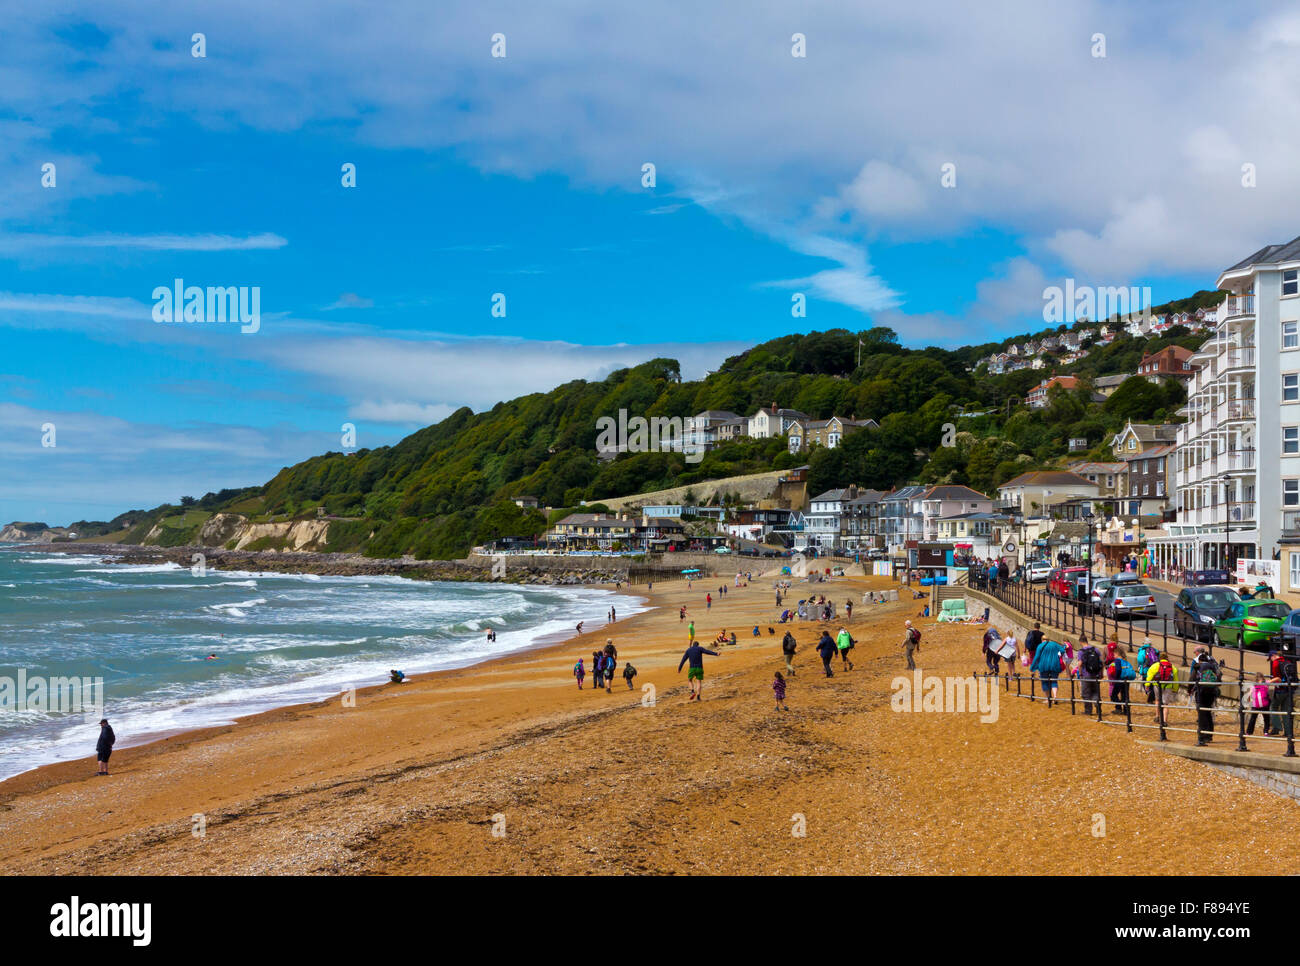 The beach at Ventnor a seaside resort on the south coast of the Isle of Wight in southern England UK Stock Photo